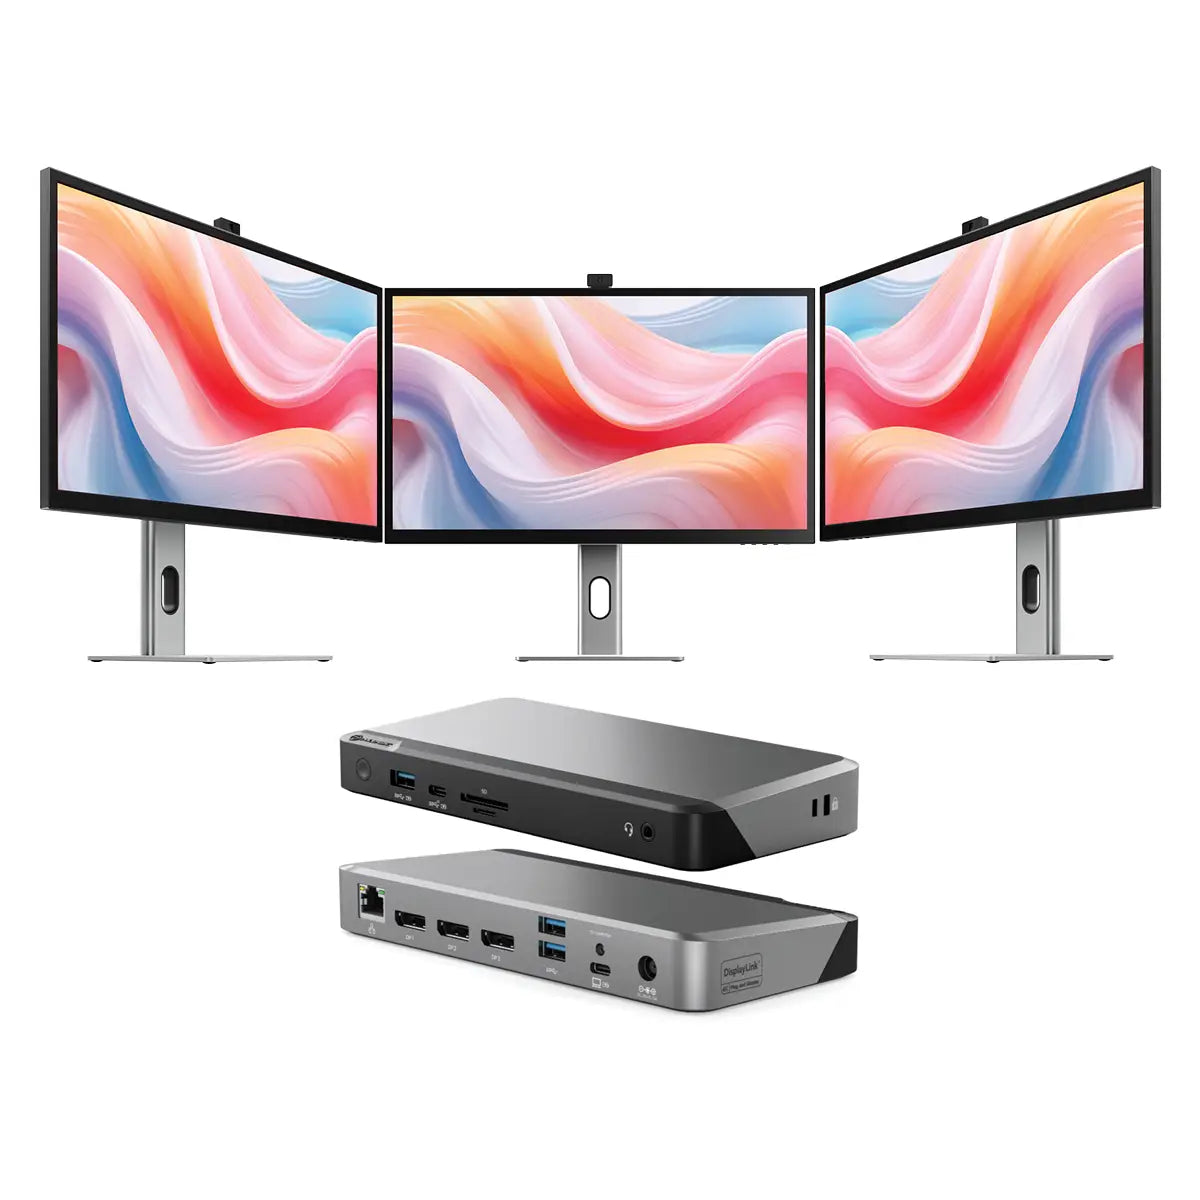 clarity-pro-27-uhd-4k-monitor-with-65w-pd-and-webcam-pack-of-3-dx3-triple-4k-display-universal-docking-station-with-100w-power-delivery_1